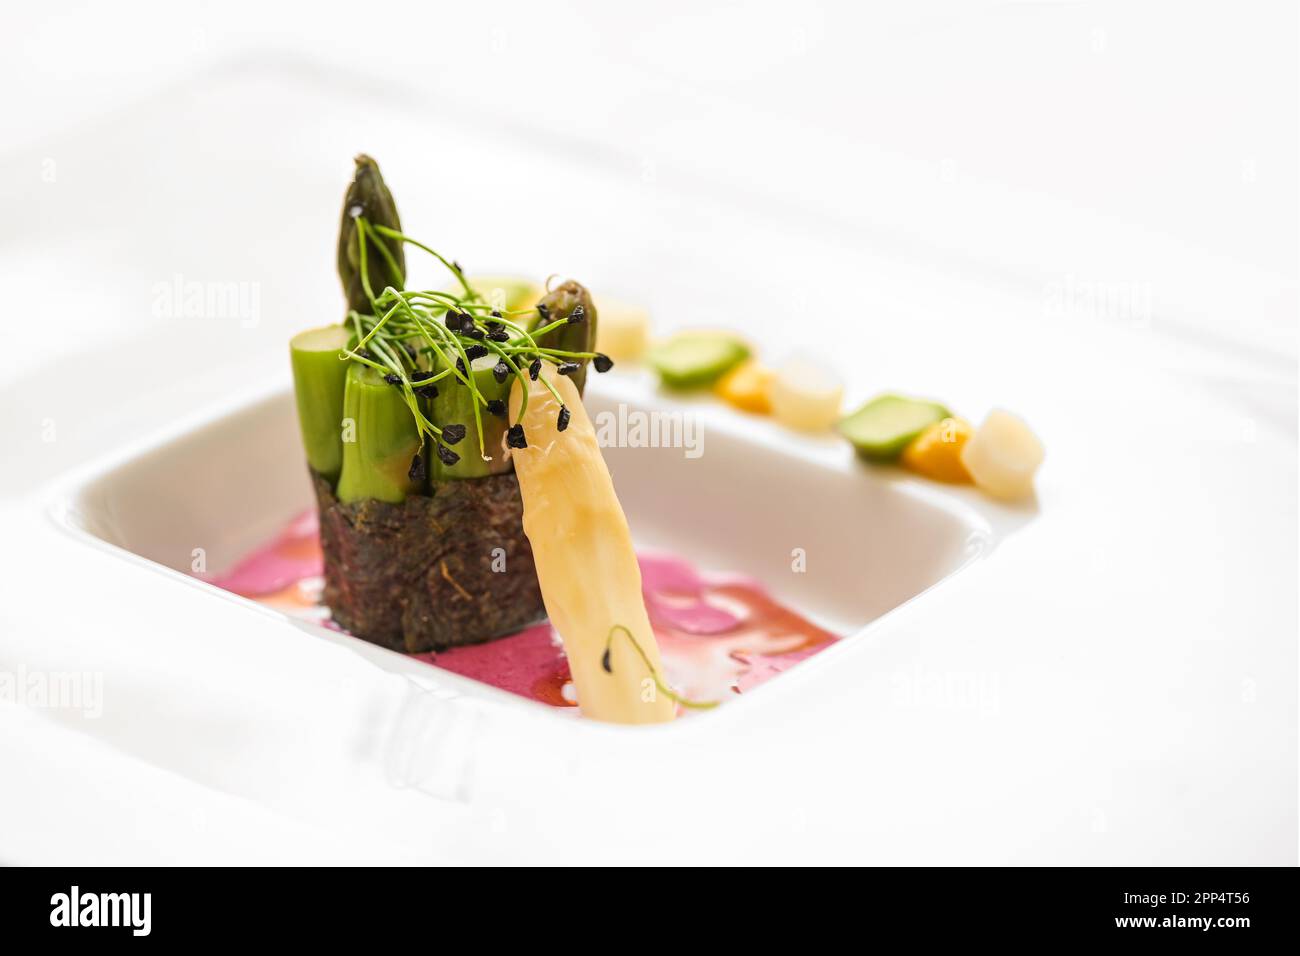 Vegetable course of a gourmet menu made of green asparagus wrapped in a nori seaweed leaf, beetroot dressing and leek sprouts on a white plate, copy s Stock Photo